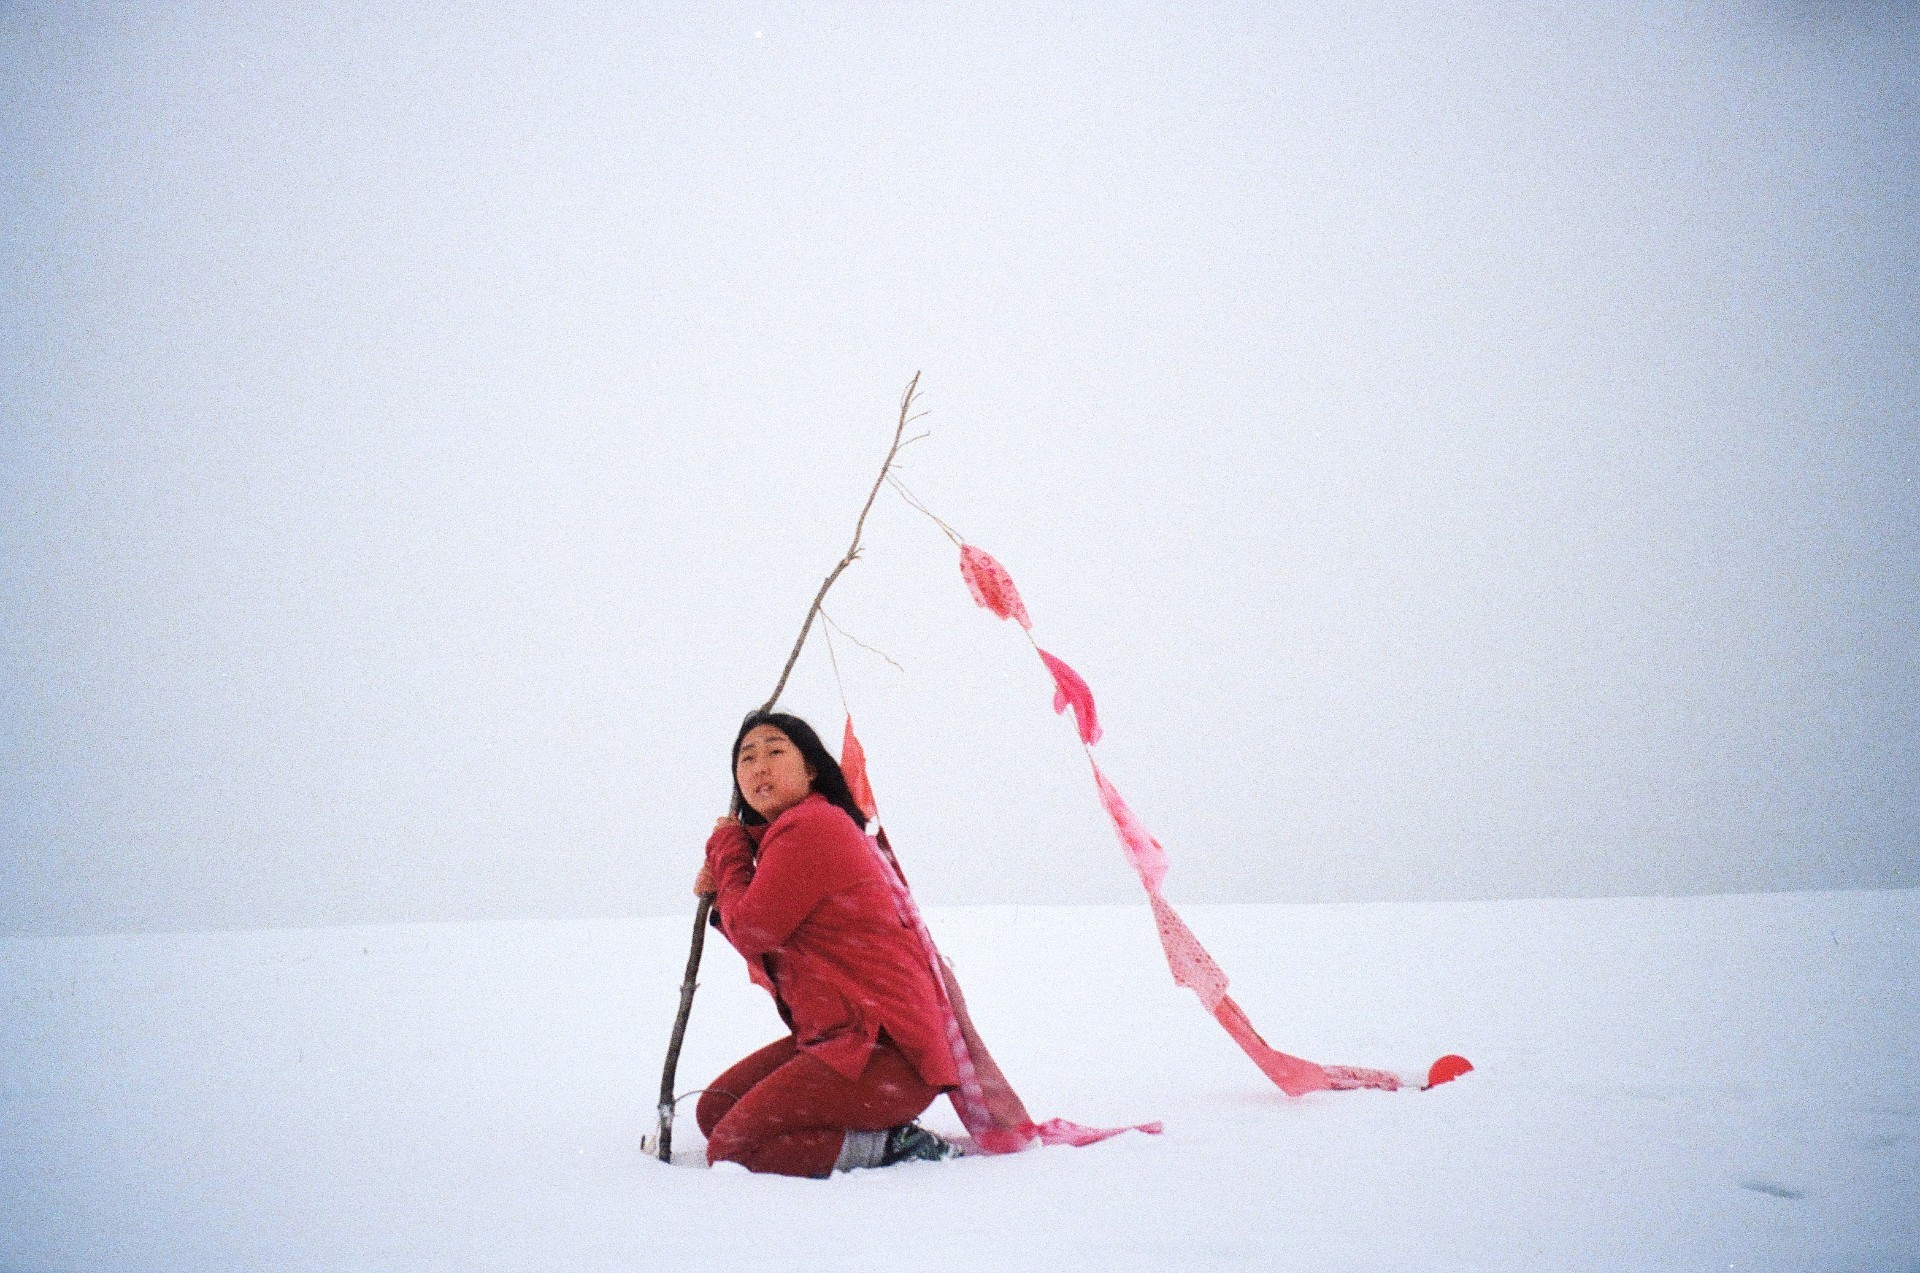 Helen Park, Blood on Snow, shown during Nuit Blanche. 